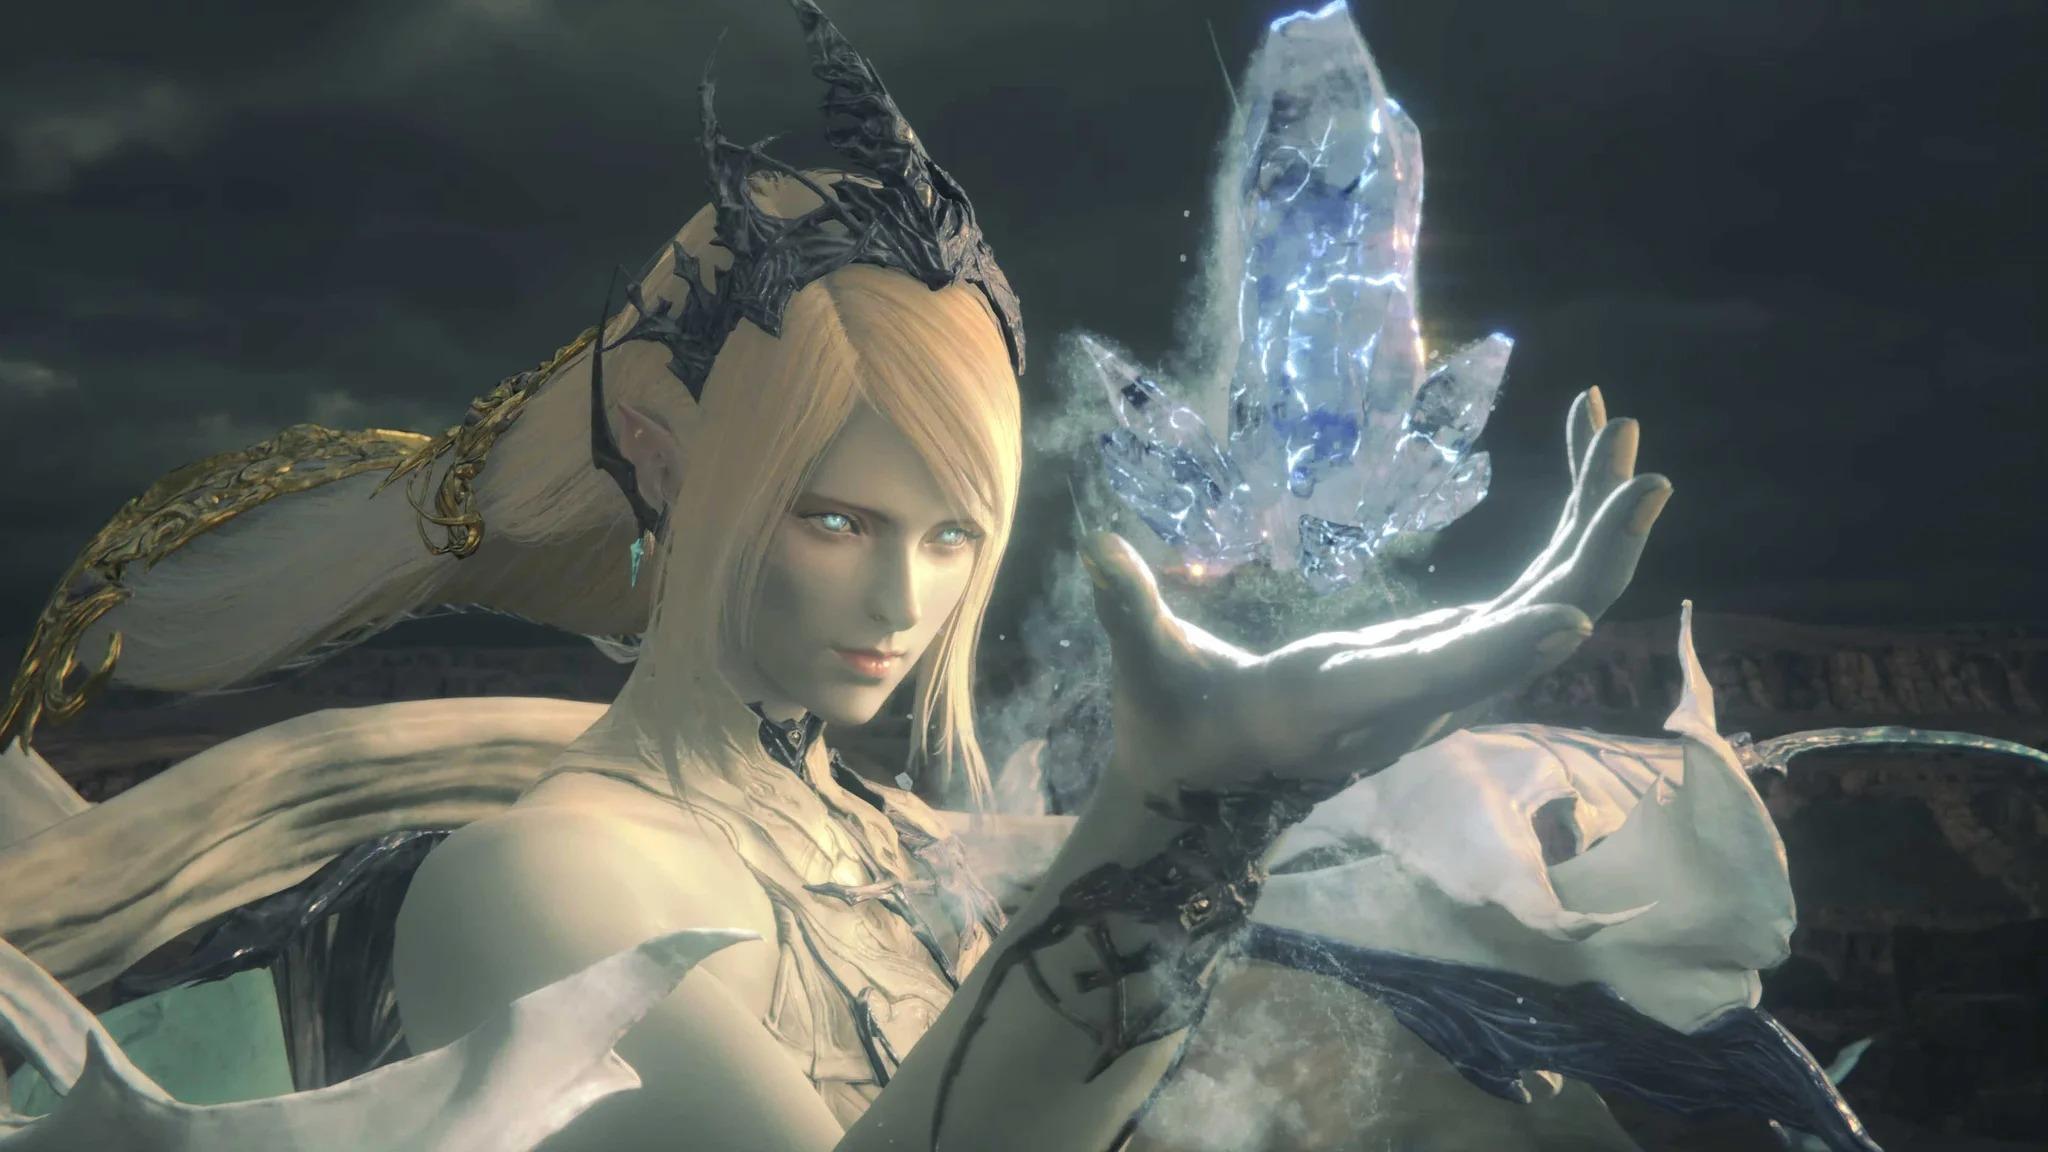 Shiva from Final Fantasy XVI summoning a column of ice in her hand.